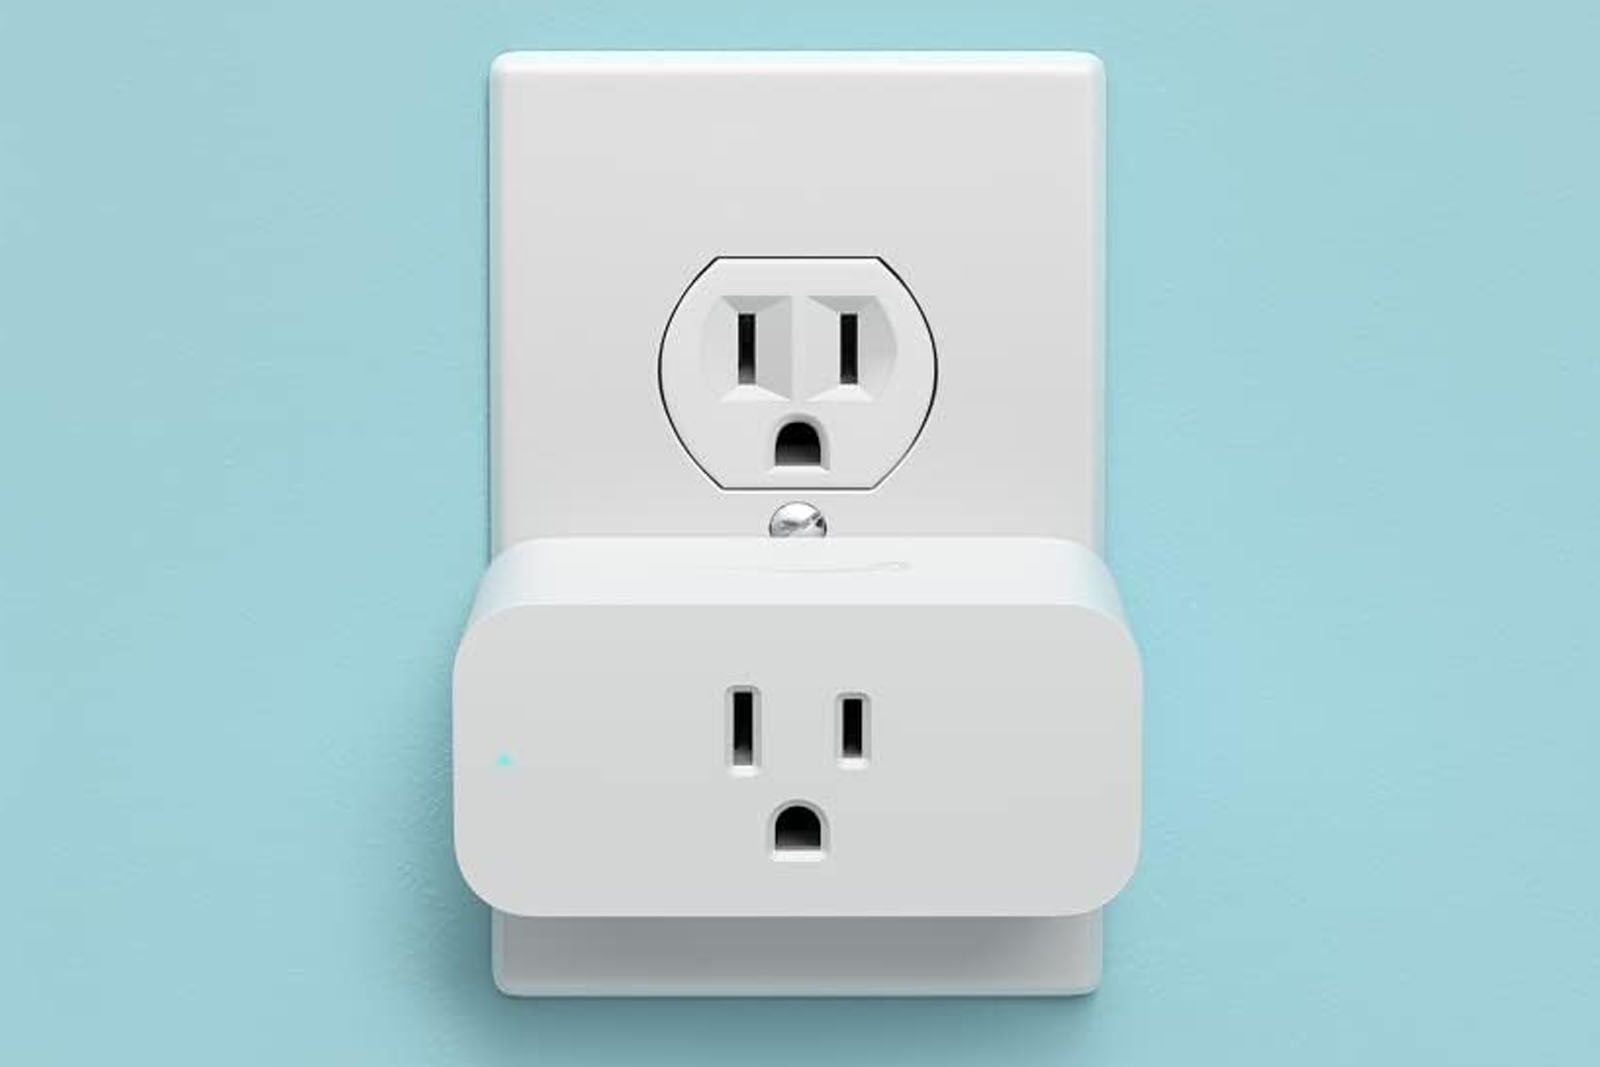 Amazon Smart Plug gets a super 48% discount to supercharge your smart home